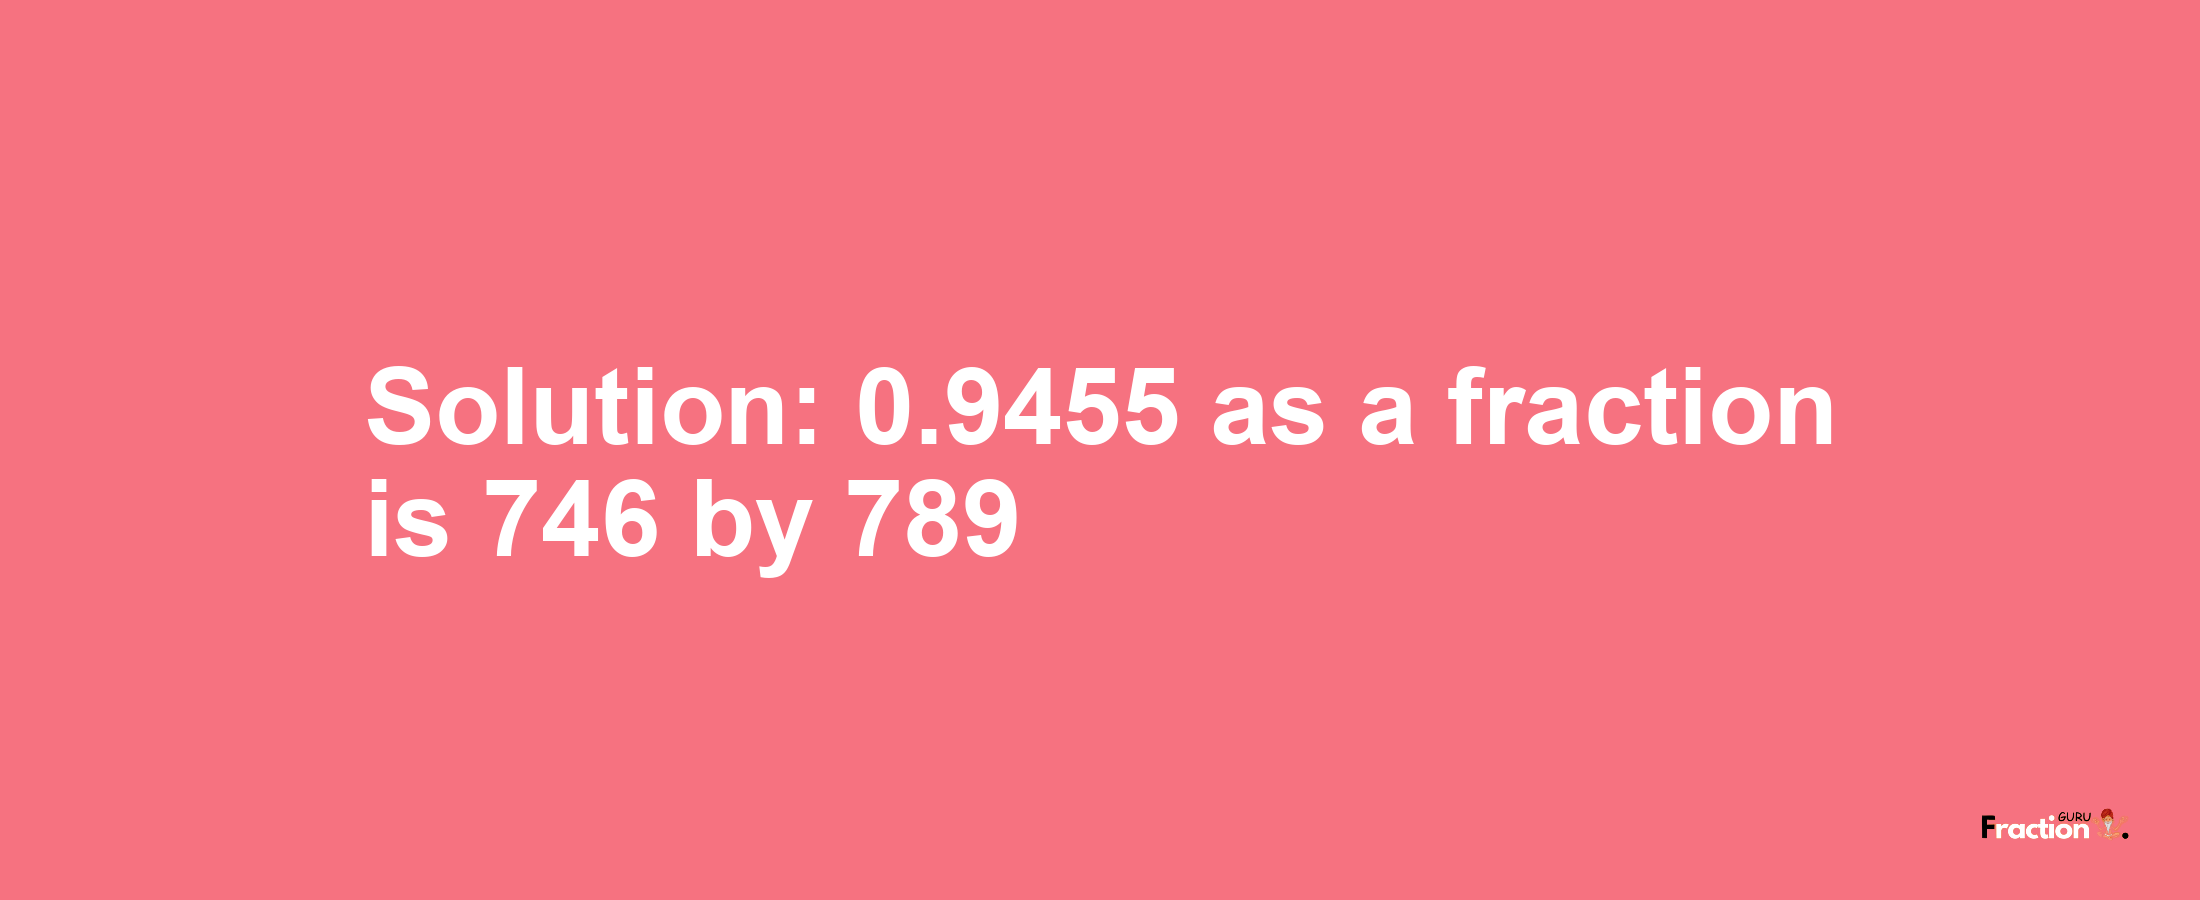 Solution:0.9455 as a fraction is 746/789